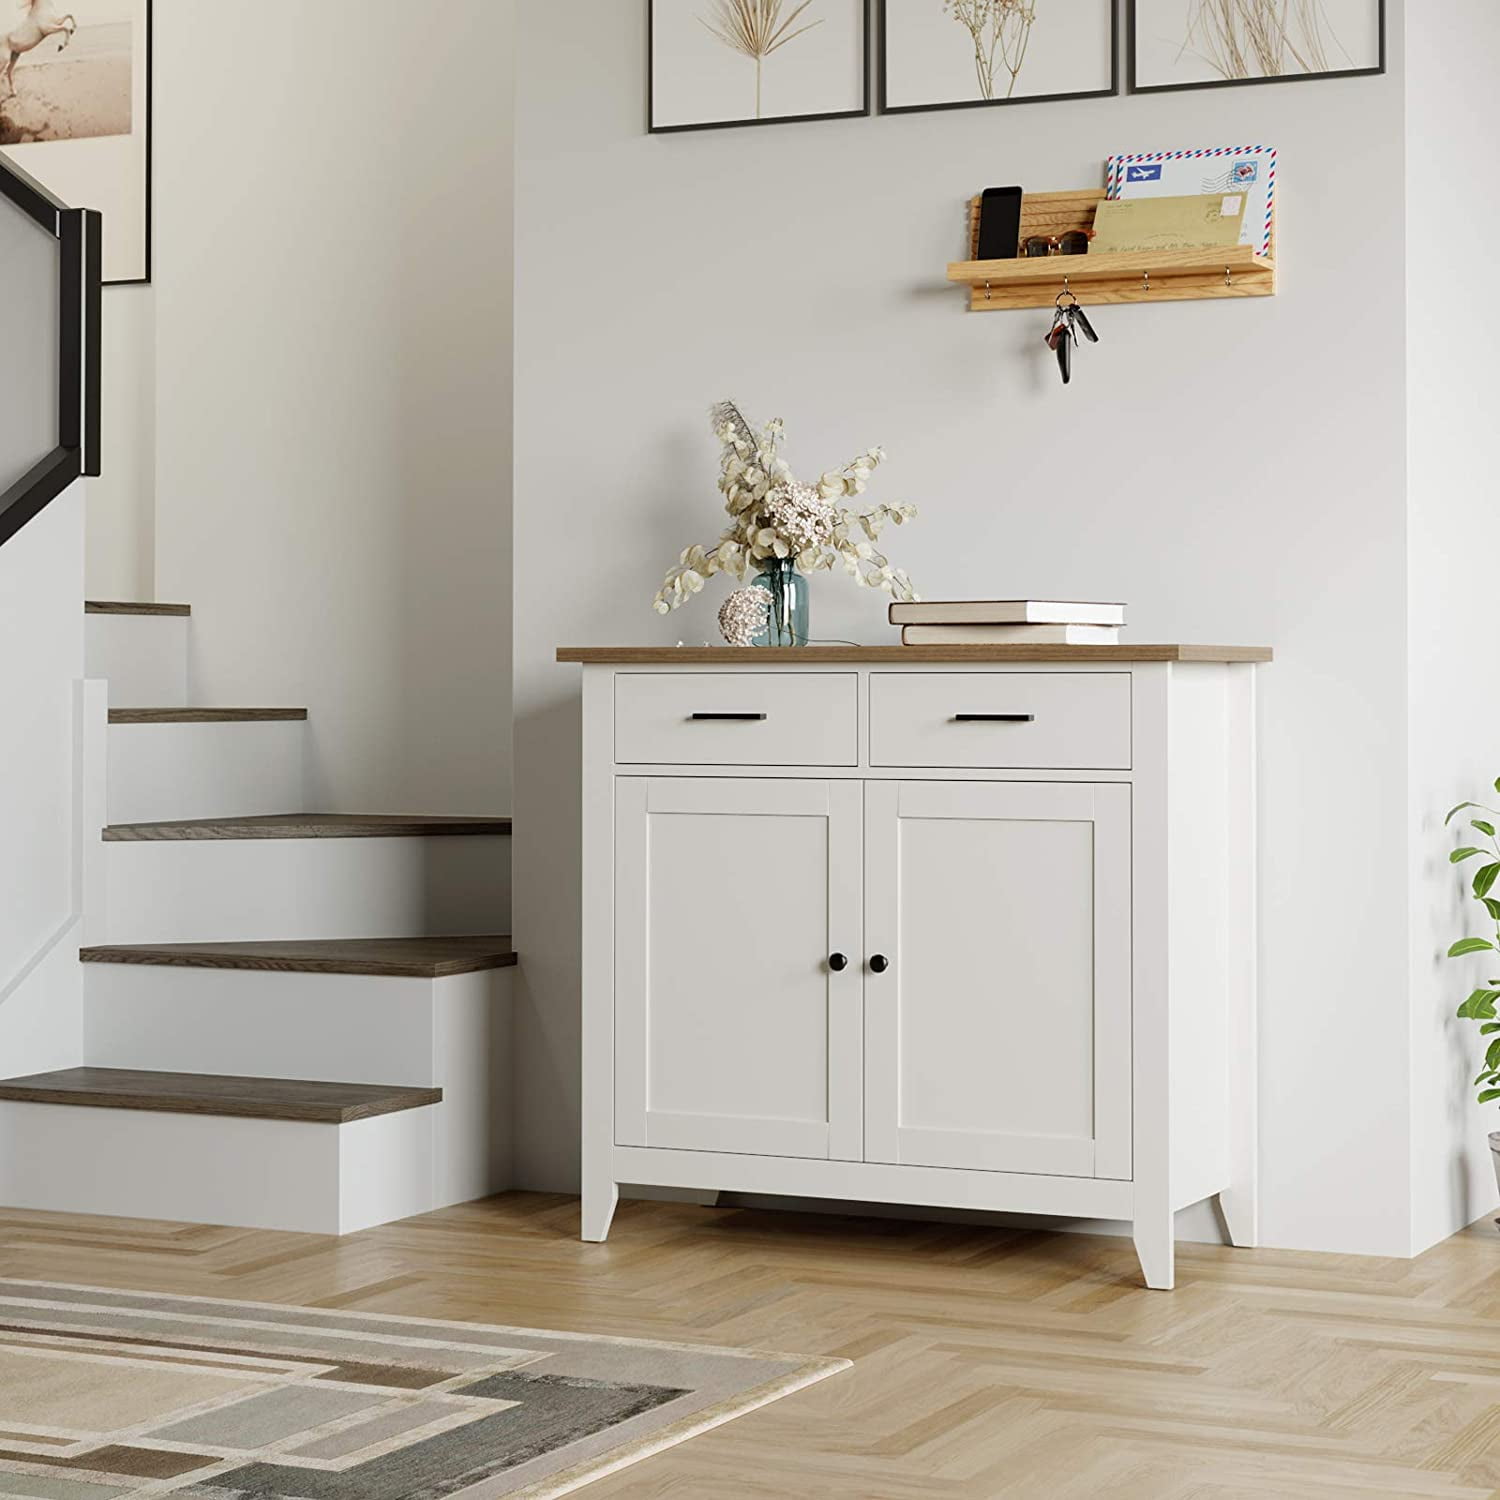 White Warmiehomy Wooden Sideboard Cabinet Sideboard Storage Cabinet Chest of Drawer with 2-Drawers 2-Shelves Living Room Hallway Bedroom Cabinet 